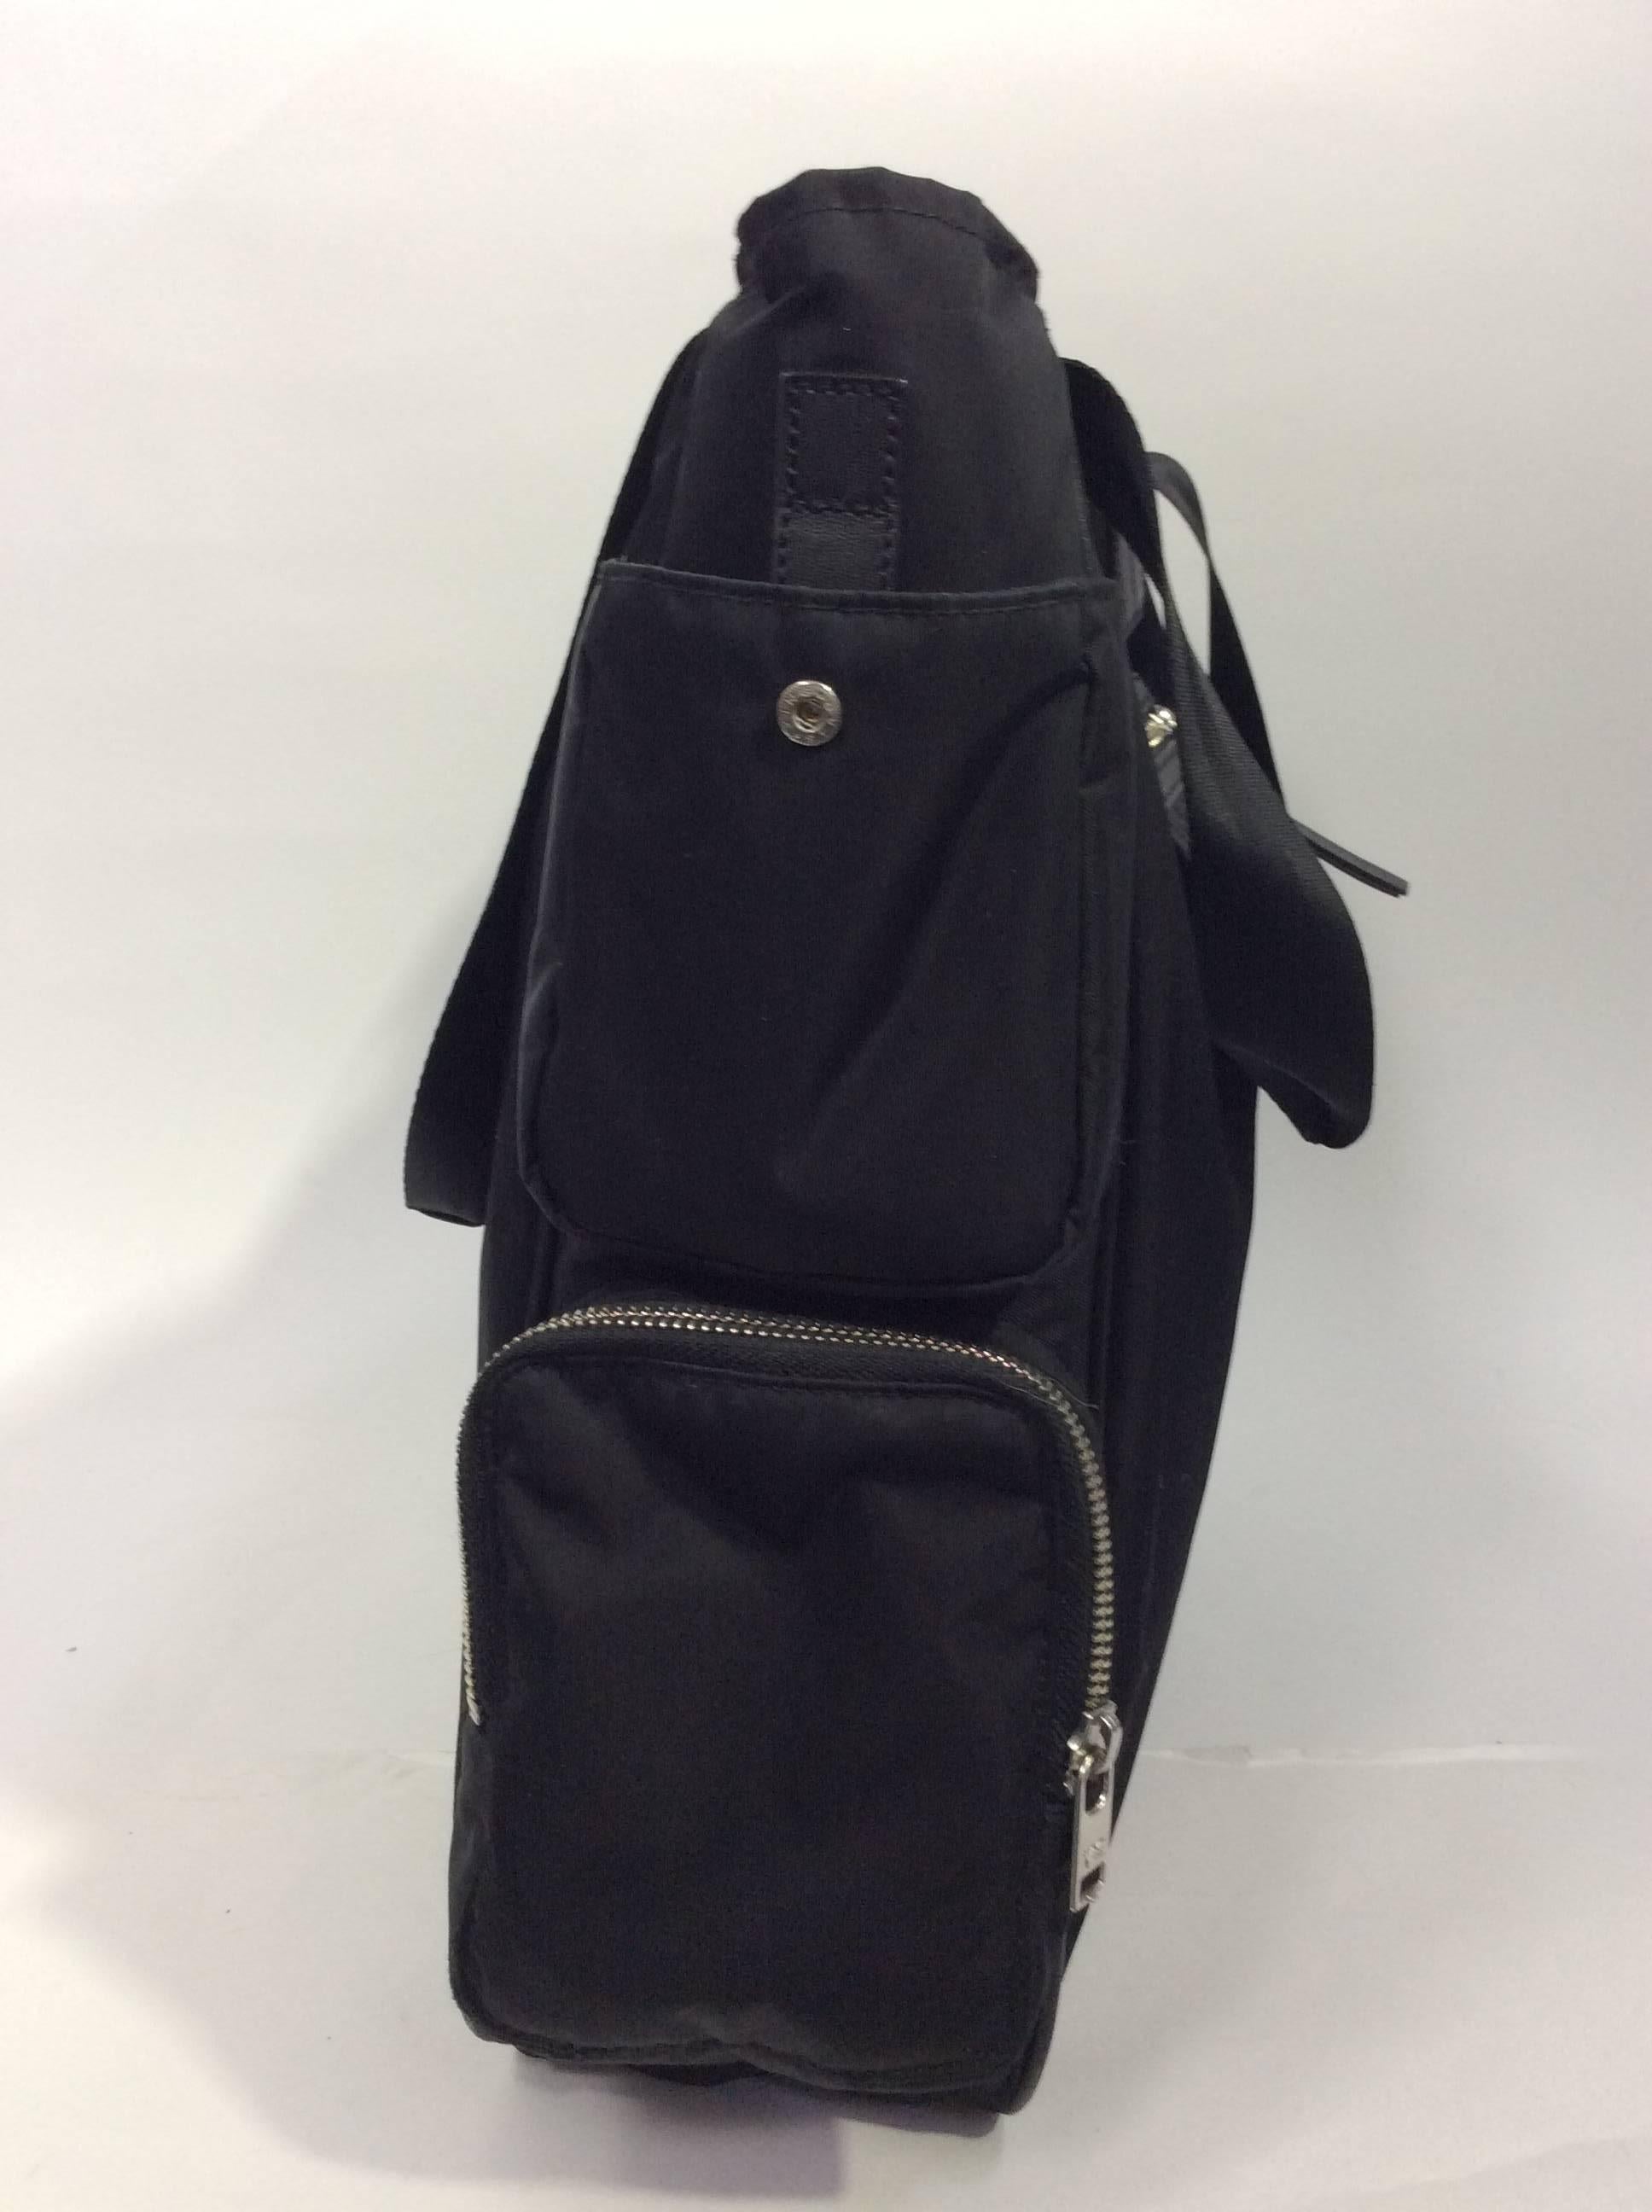 Yohji Yamamoto Multi Pocket Black Handbag
6 outer pockets
Silver hardware
Over the shoulder nylon straps
380mm
100% polyester lined
Outer shell is also polyester
Made in Vietnam